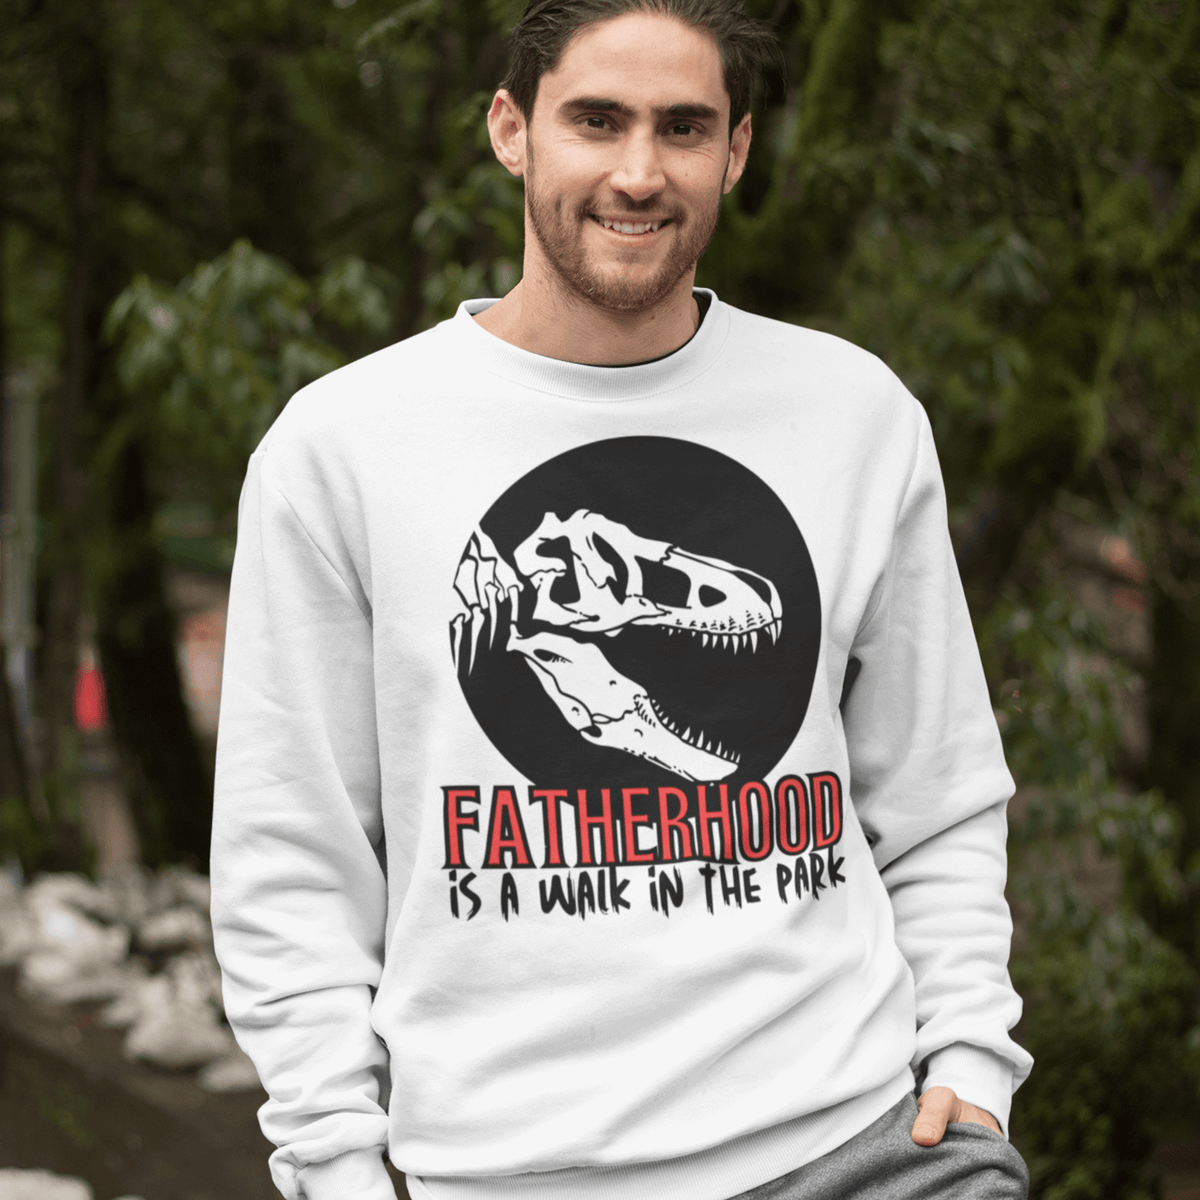 sweatshirt, dinosaur, fatherhood, parenting, family, dad life, cozy wear, graphic design, father's day, gift for dad, comfortable, unique phrase, casual style, warmth, versatile, soft fabric, empowerment, adventure, dad pride, loungewear, fashionable, quality, durability.fatherhood is a walk in the park tee